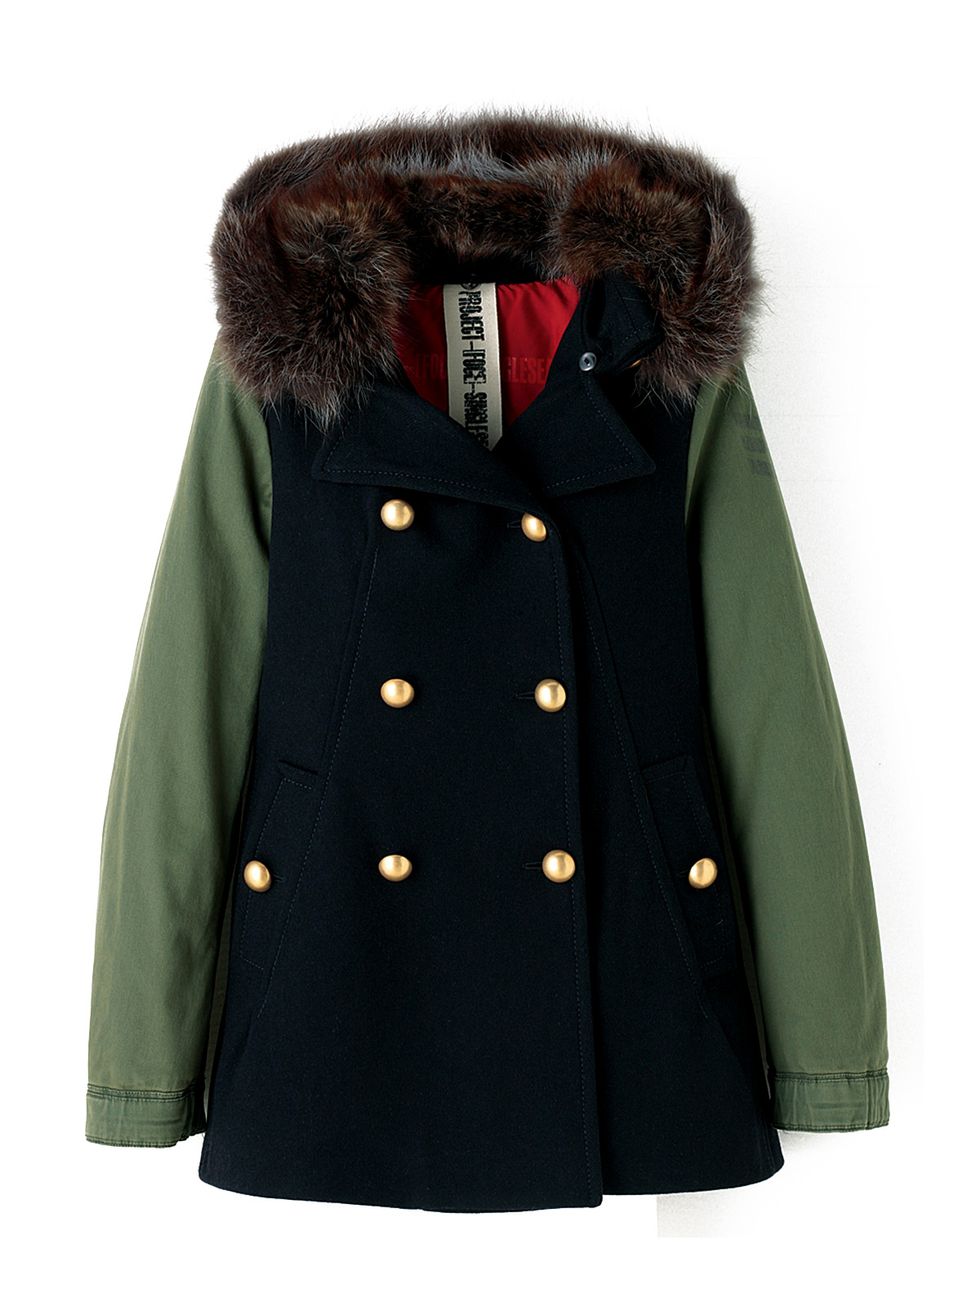 Clothing, Sleeve, Coat, Textile, Collar, Outerwear, Fashion, Natural material, Jacket, Fur clothing, 